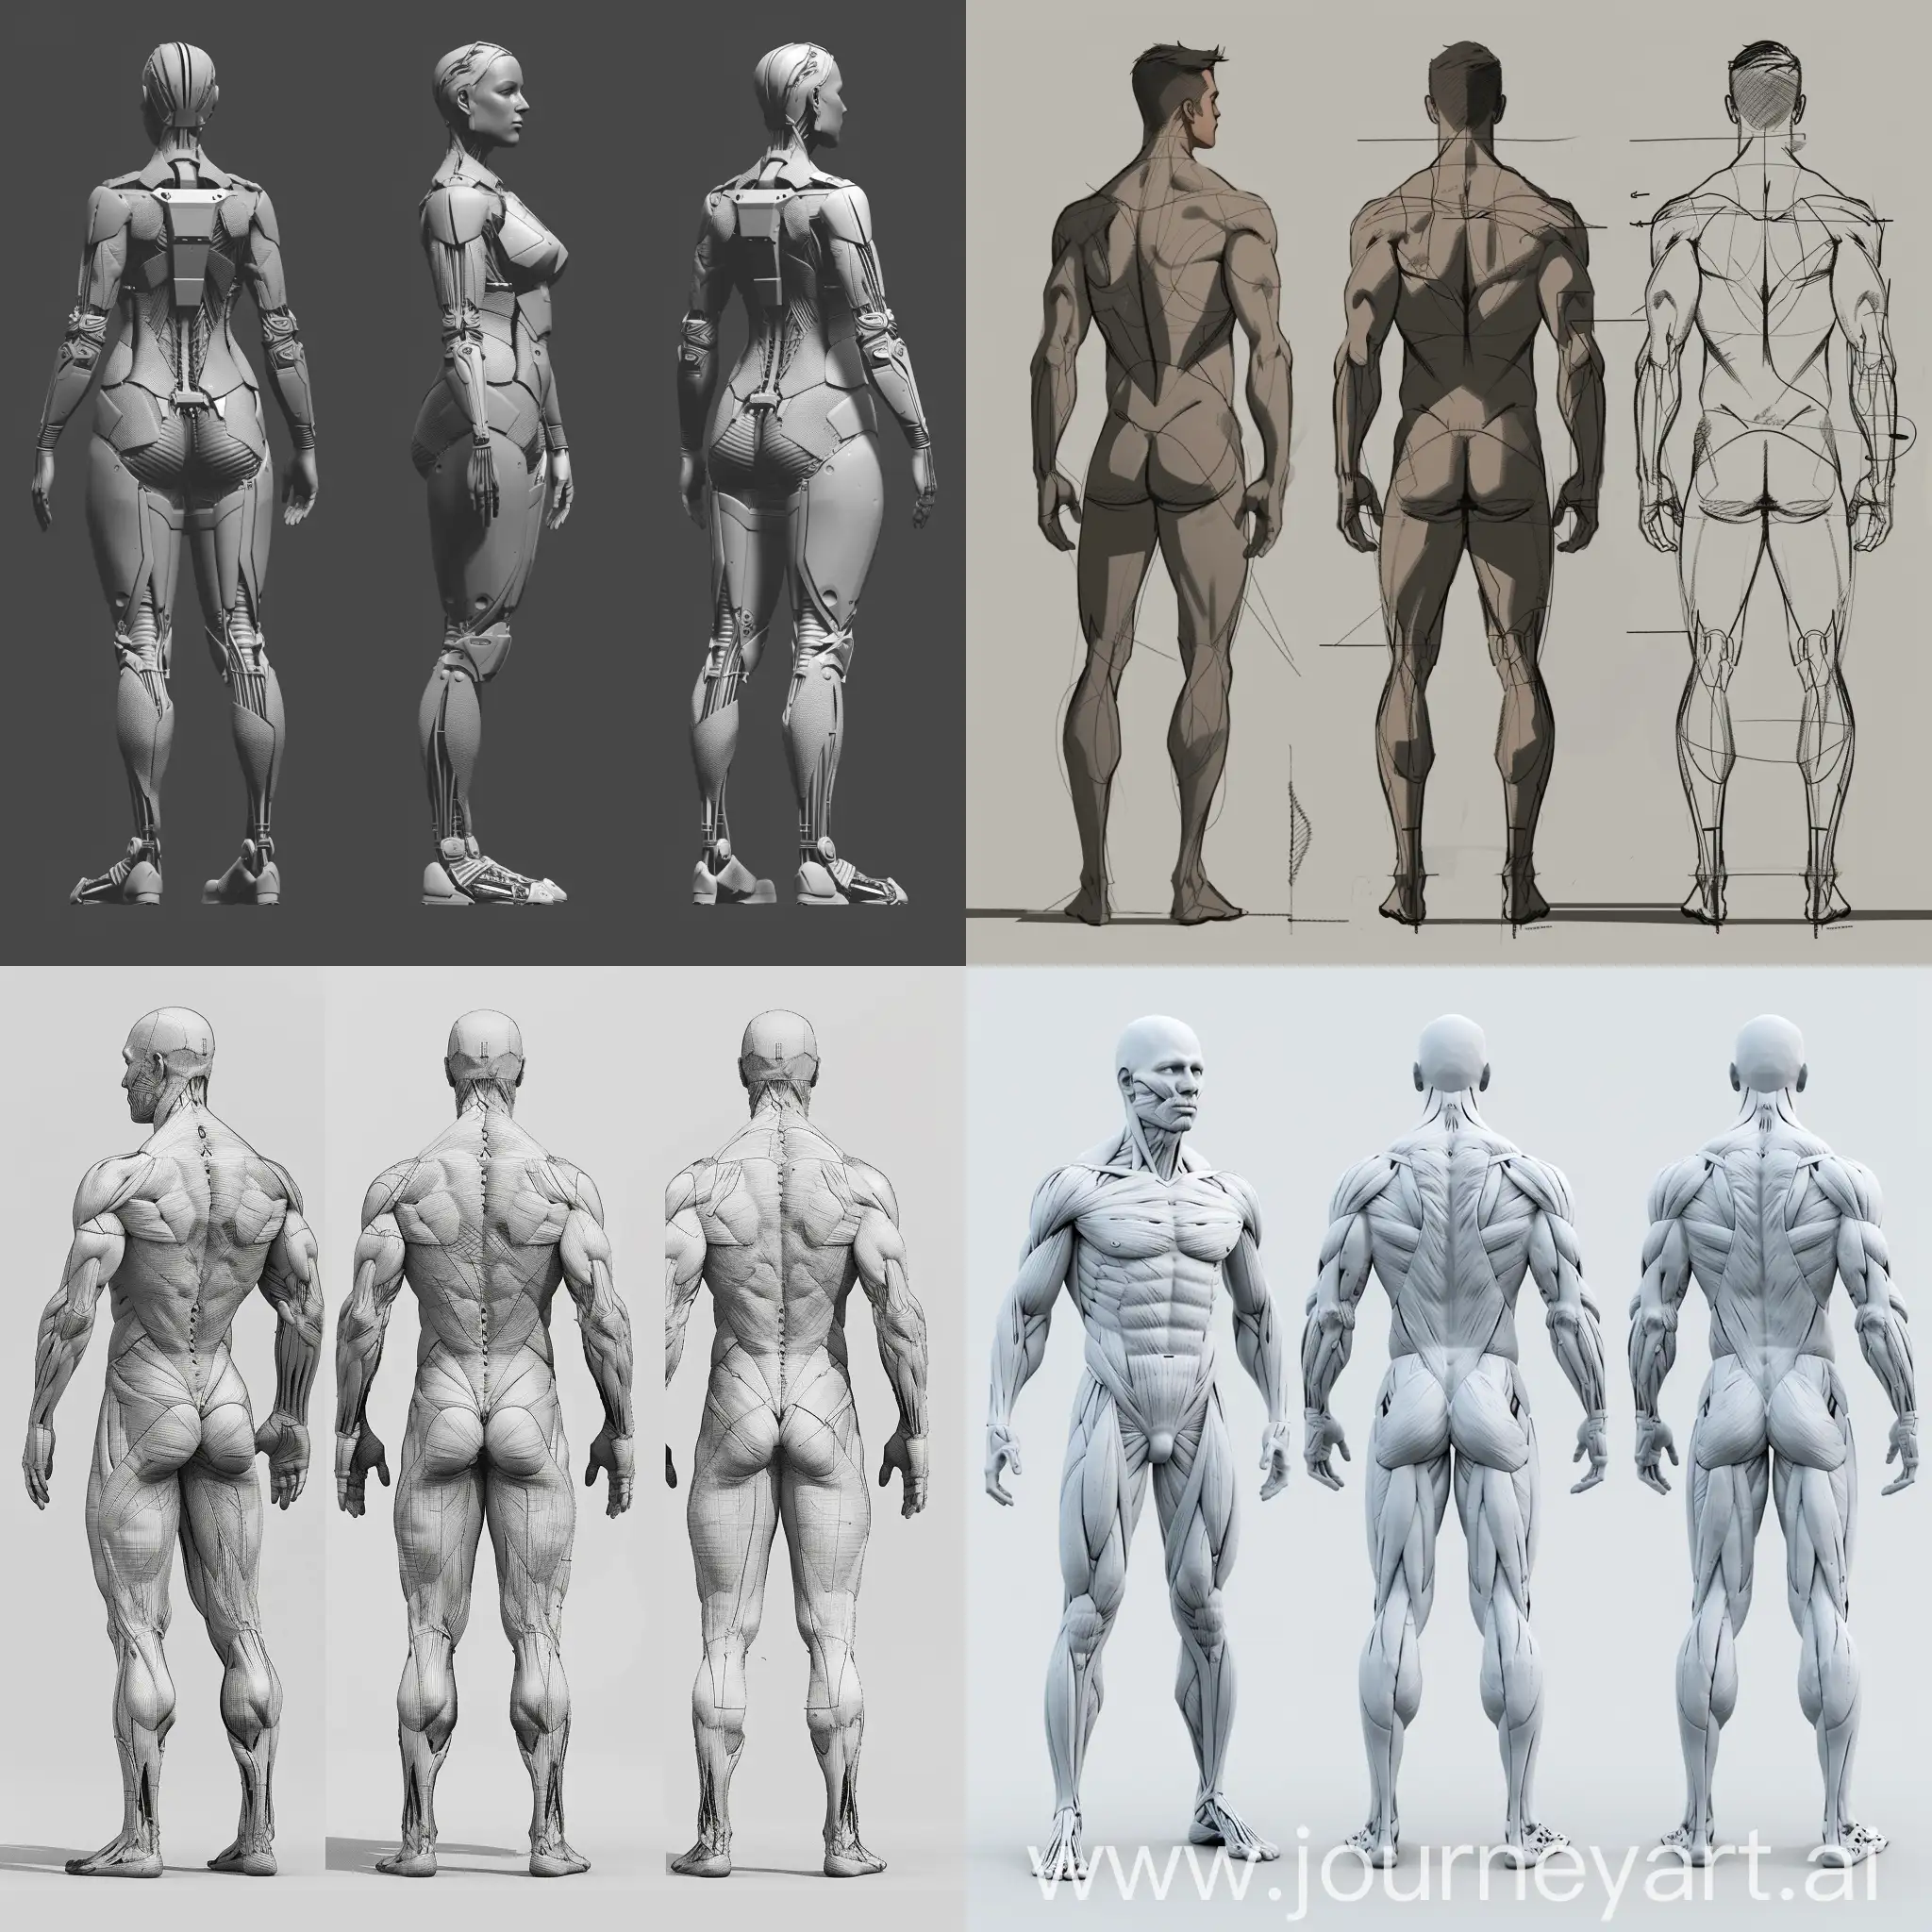 Three-Views-of-a-Full-Body-Figure-Front-Side-and-Back-Perspectives